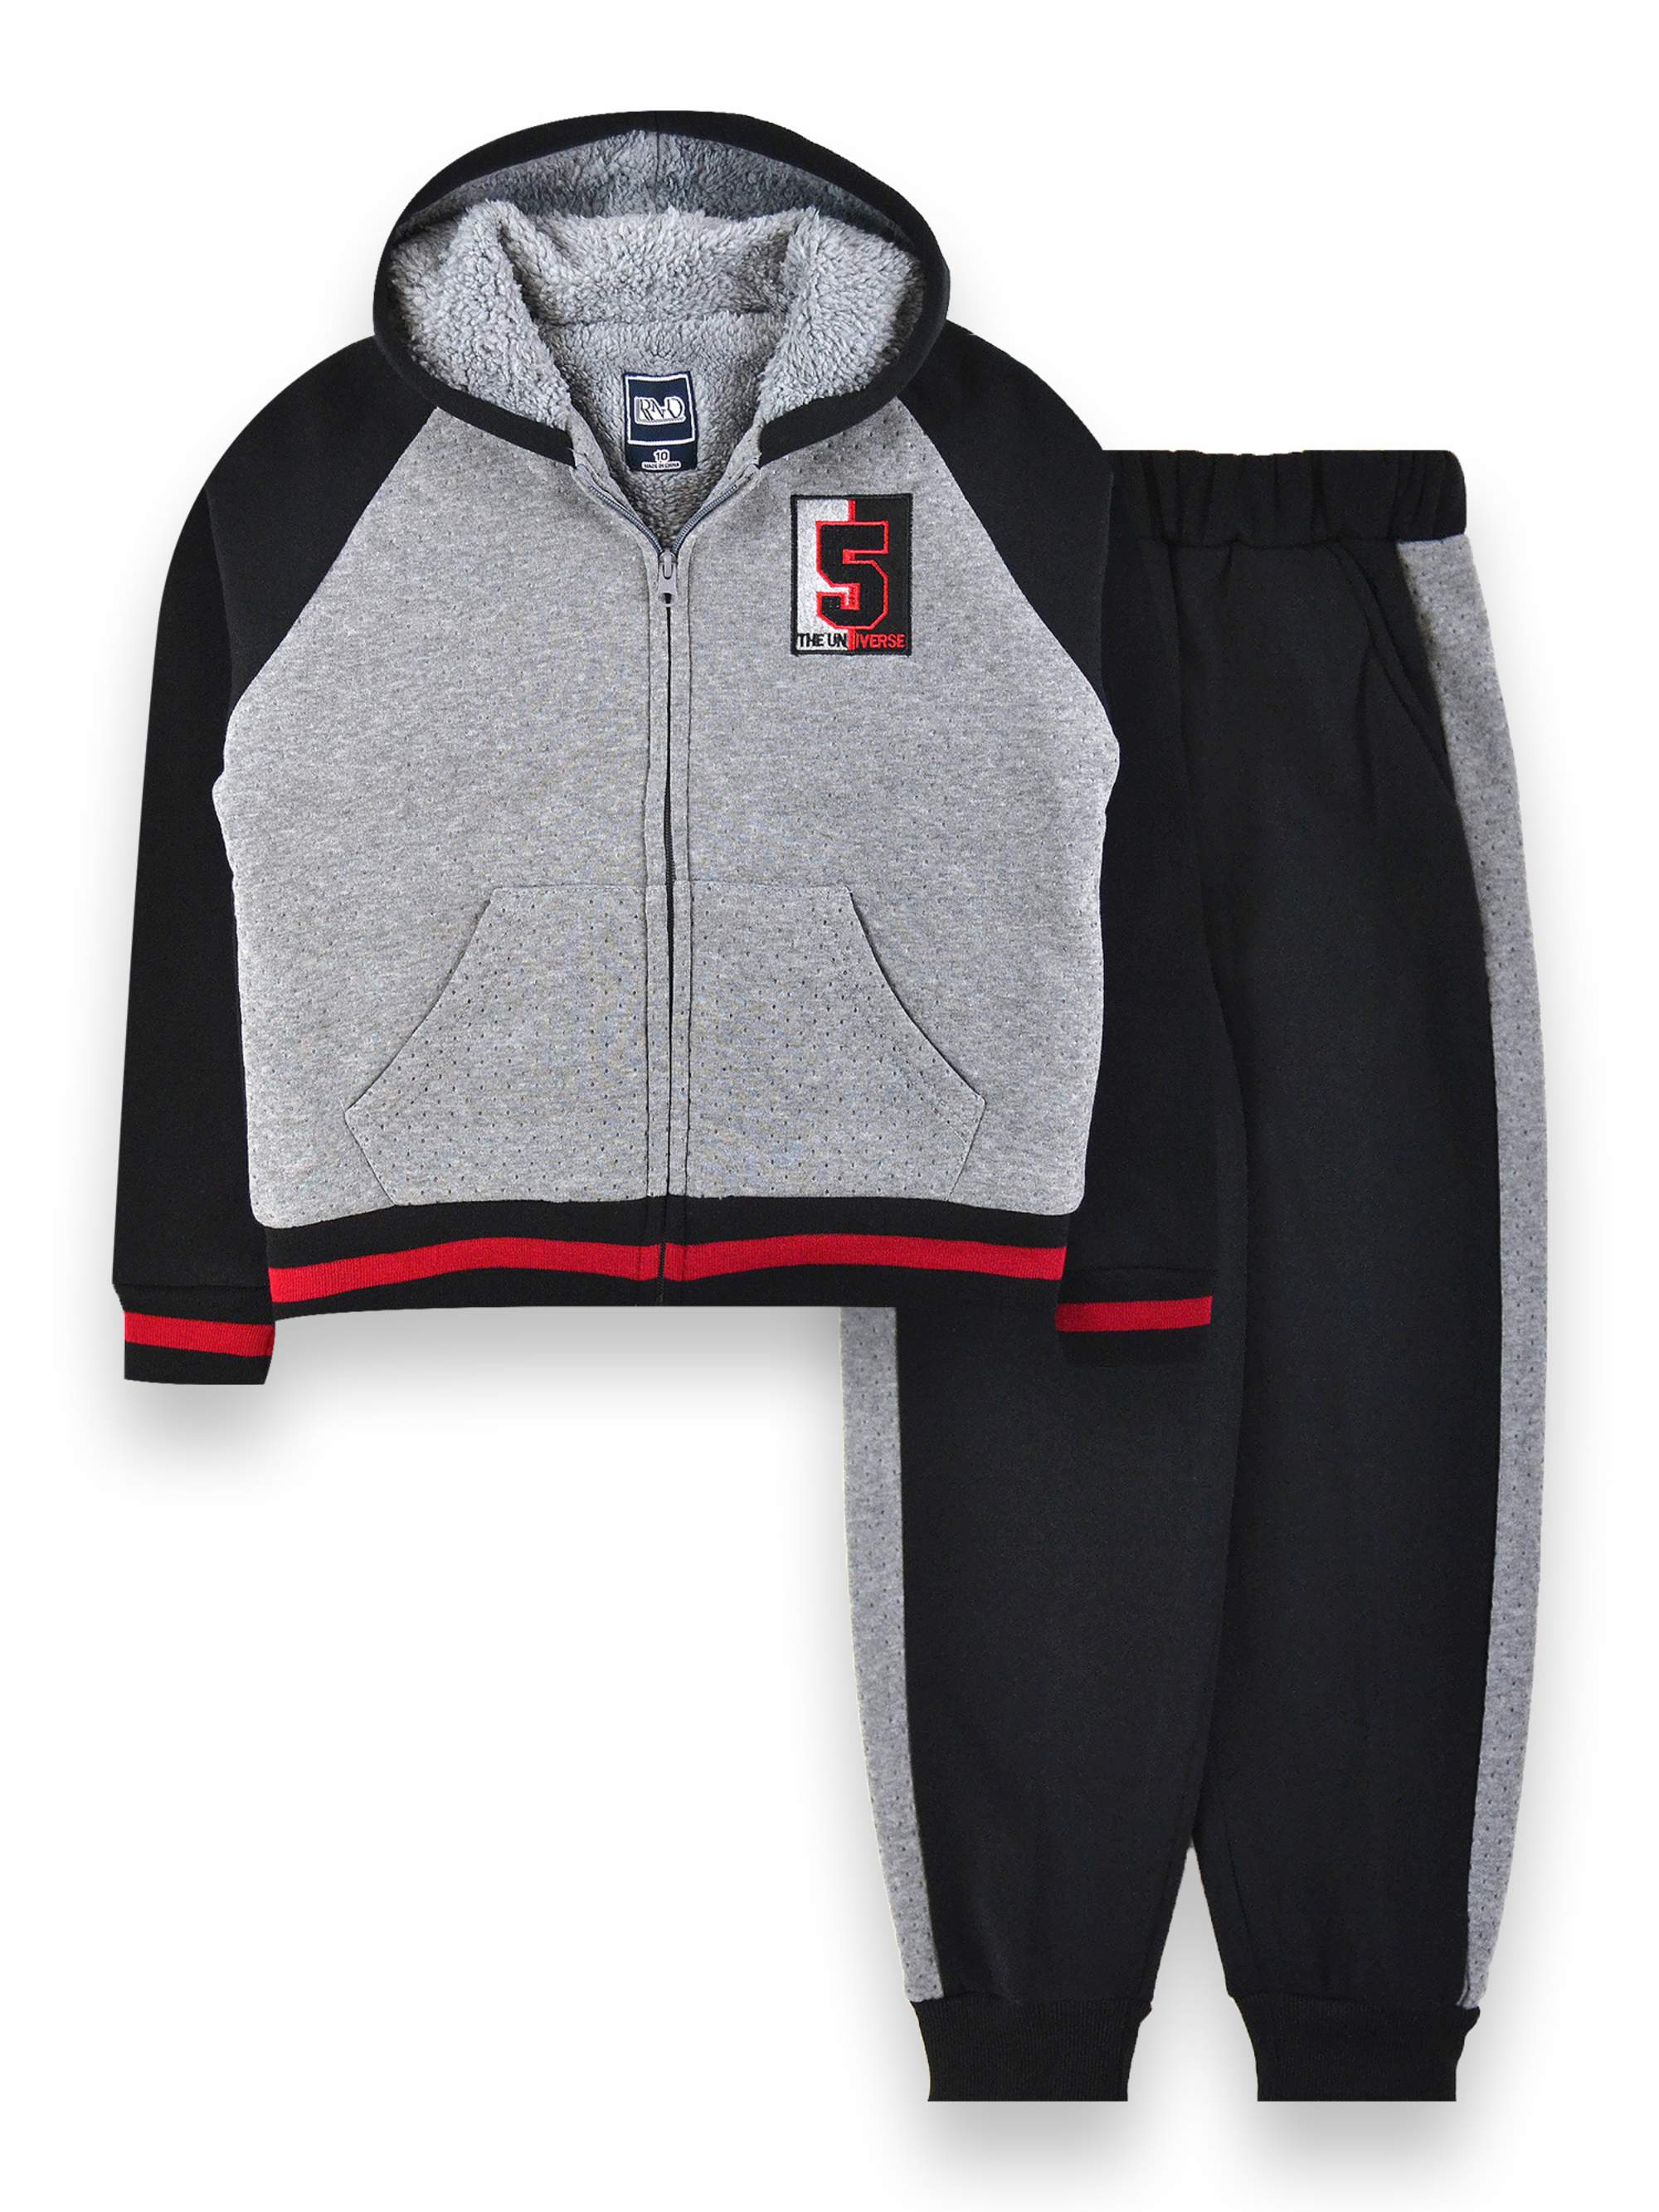 RND Boys 4-16 Sherpa Lined Zip Up Sweatshirt & Jogger Sweatpants, 2-Piece Outfit Set - image 1 of 1